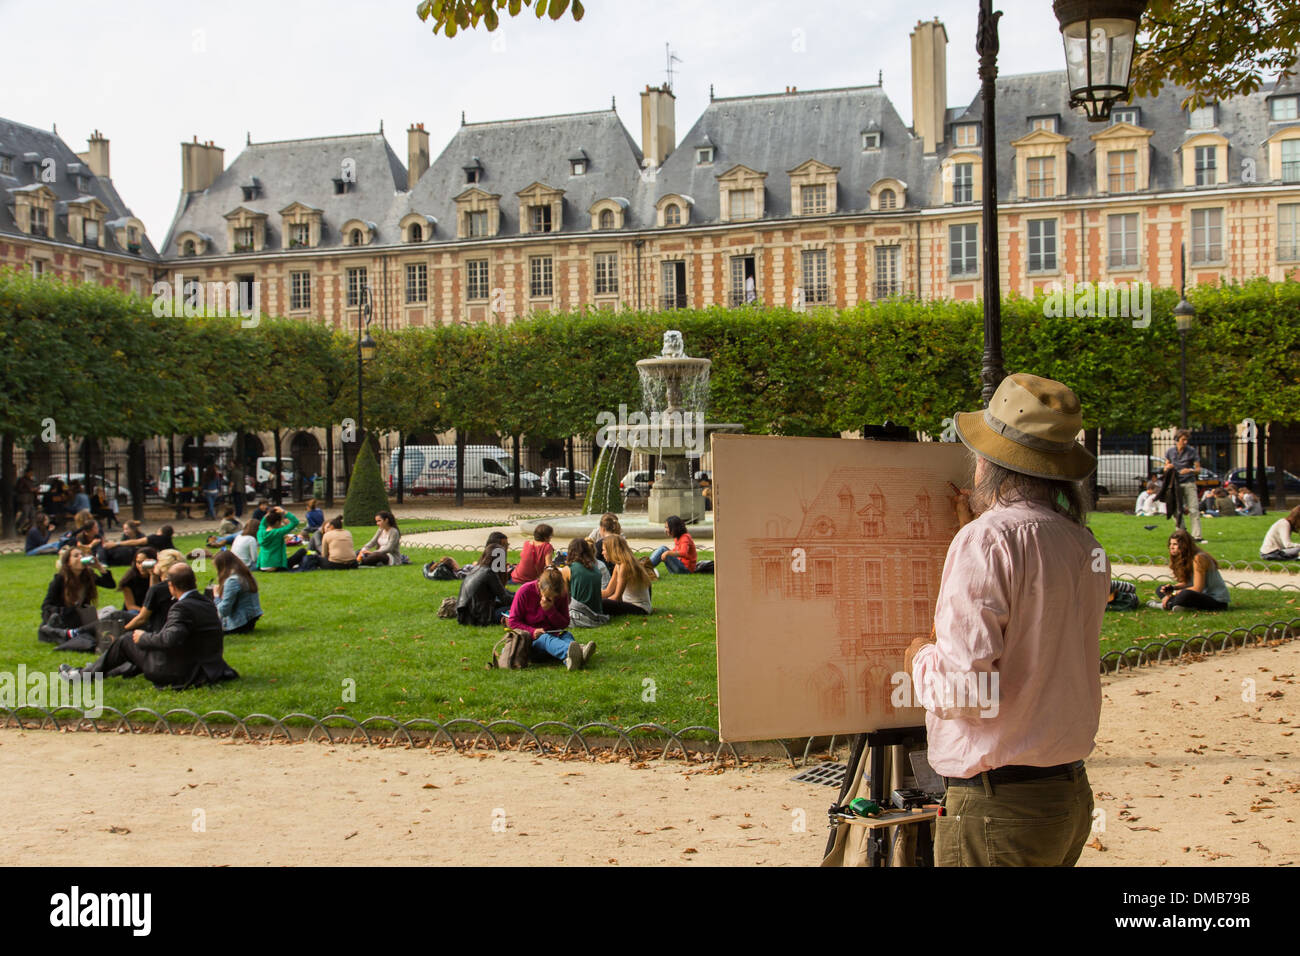 THE PLACE DES VOSGES IS SITUATED IN THE MARAIS QUARTER BETWEEN THE 3RD AND 4TH ARRONDISSEMENTS, IT IS THE OLDEST SQUARE IN PARIS, PARIS (75), ILE-DE-FRANCE, FRANCE Stock Photo